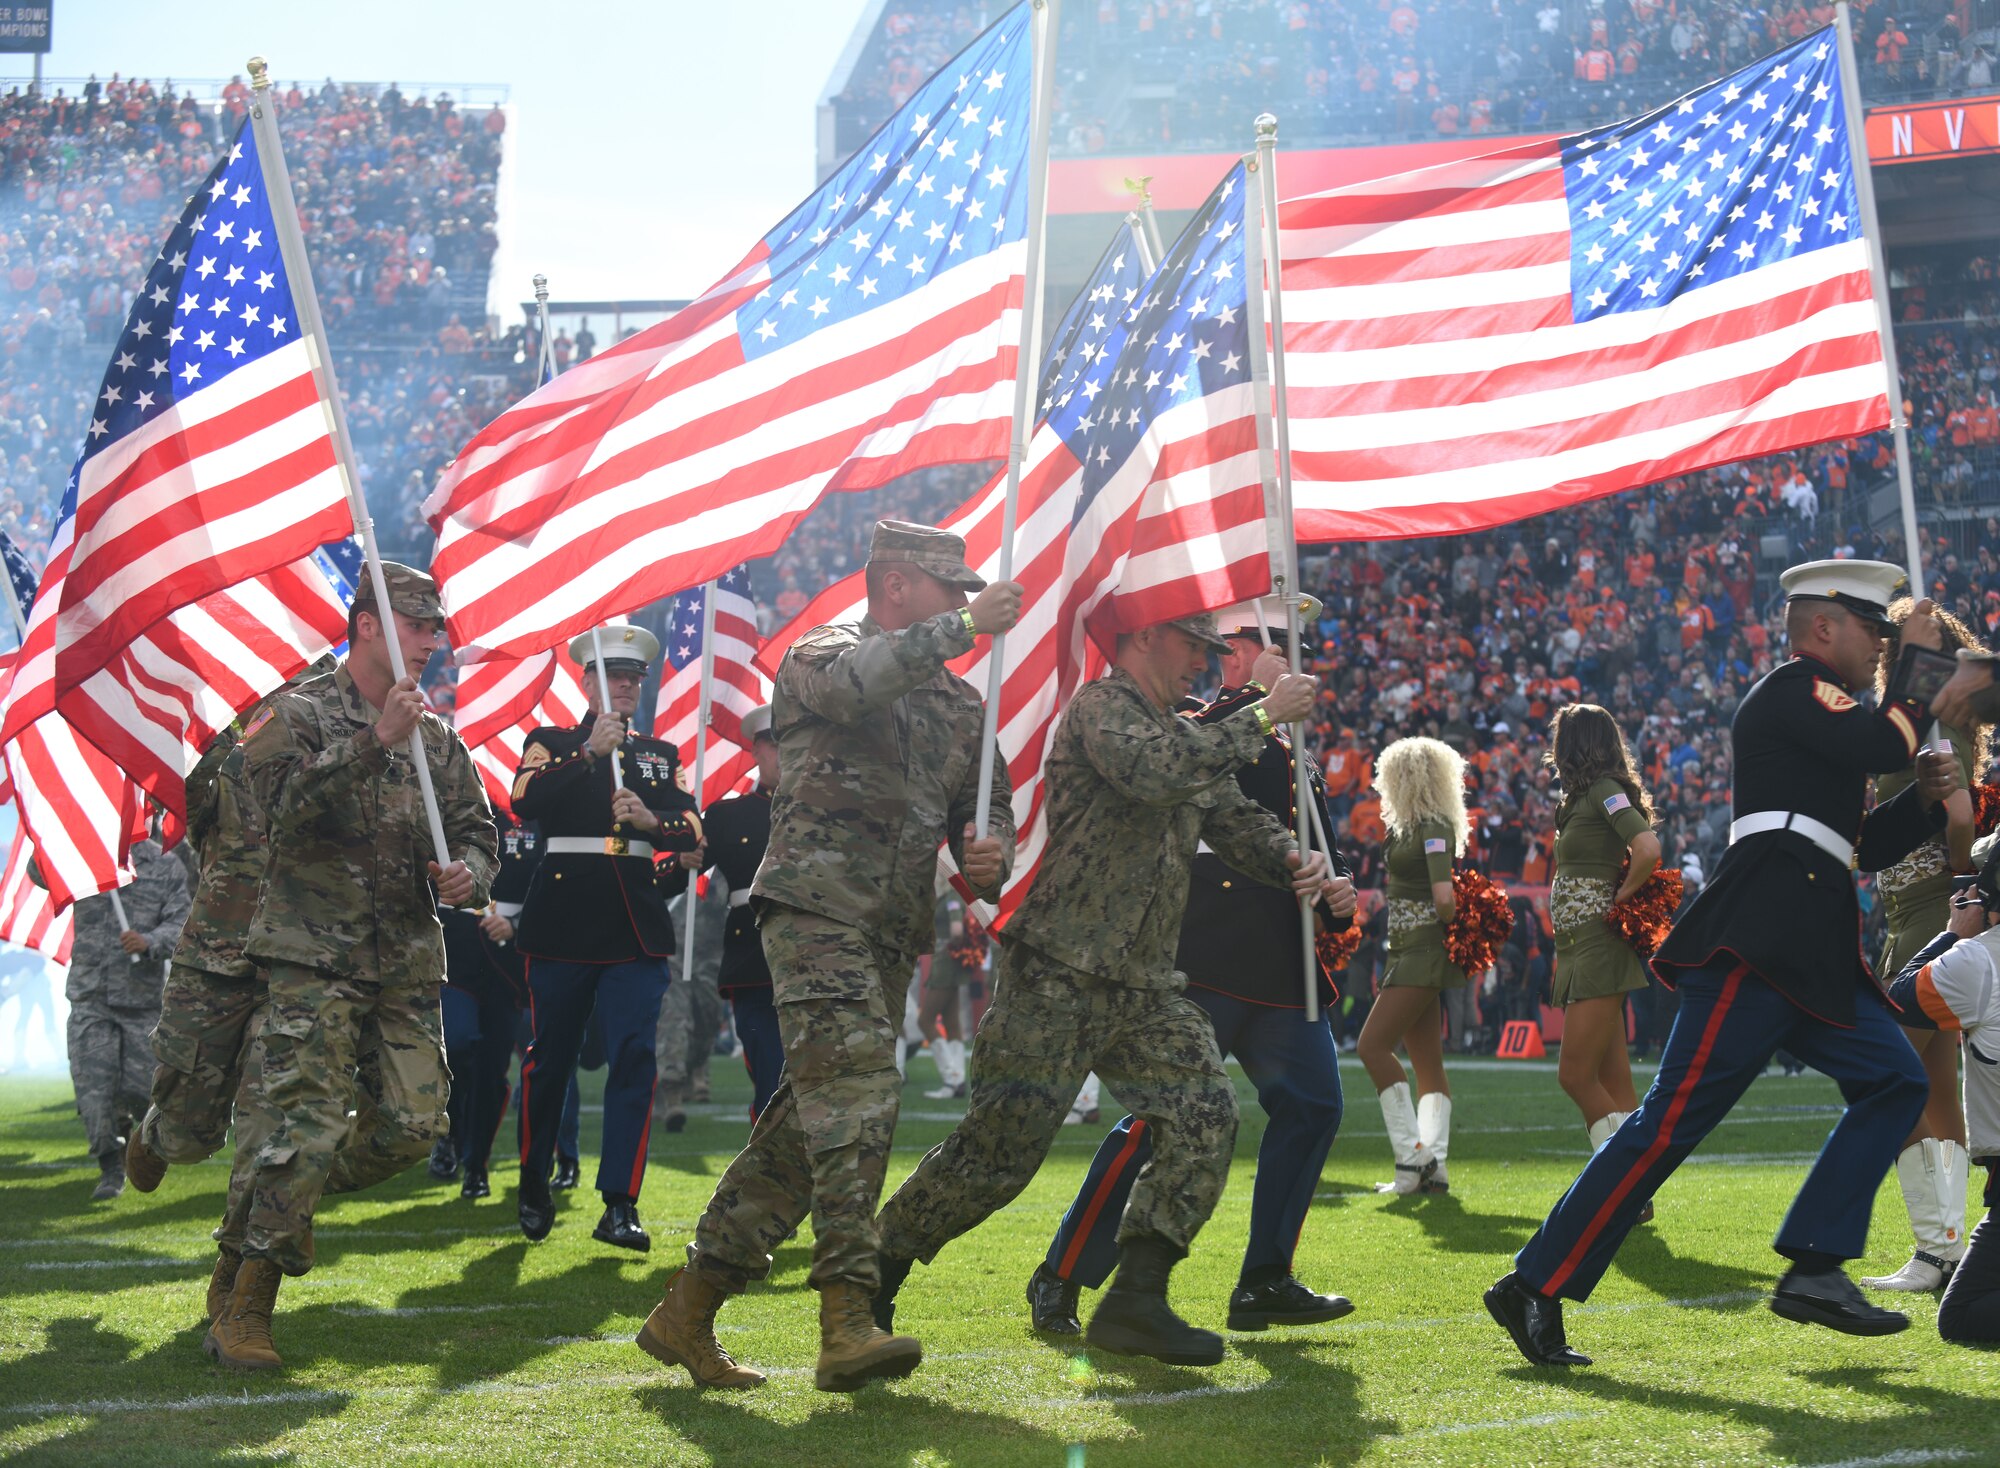 U.S. military service members run onto the field before the Denver Broncos Salute to Service game at Empower Field at Mile High in Denver, Nov. 3, 2019.